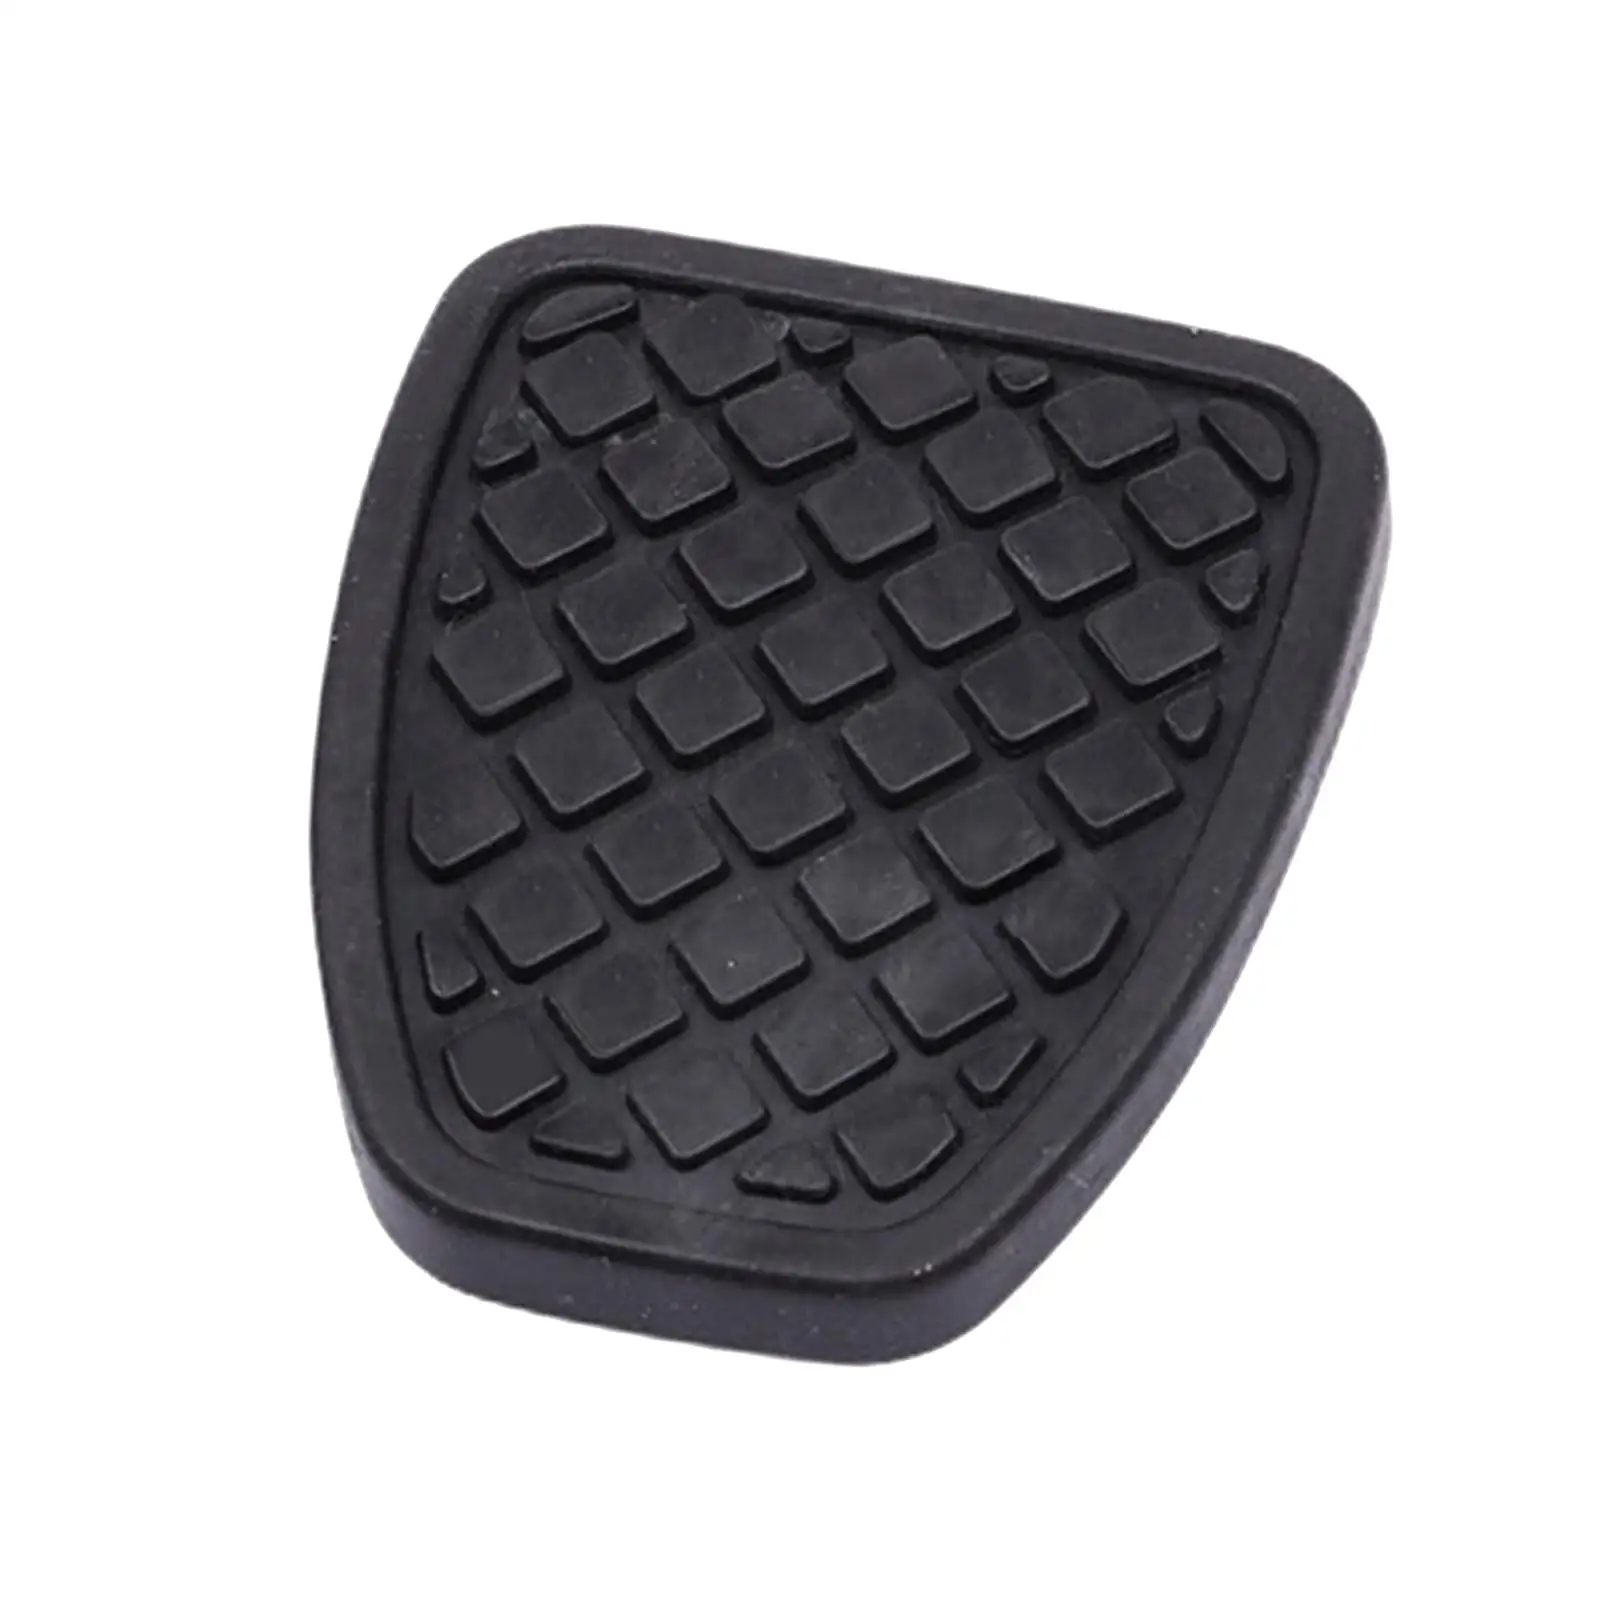 Rubber Brake Clutch Pedal Pad Durable Replace Parts Automotive Accessories High Quality 36015-ga110 for Subaru Legacy Forester